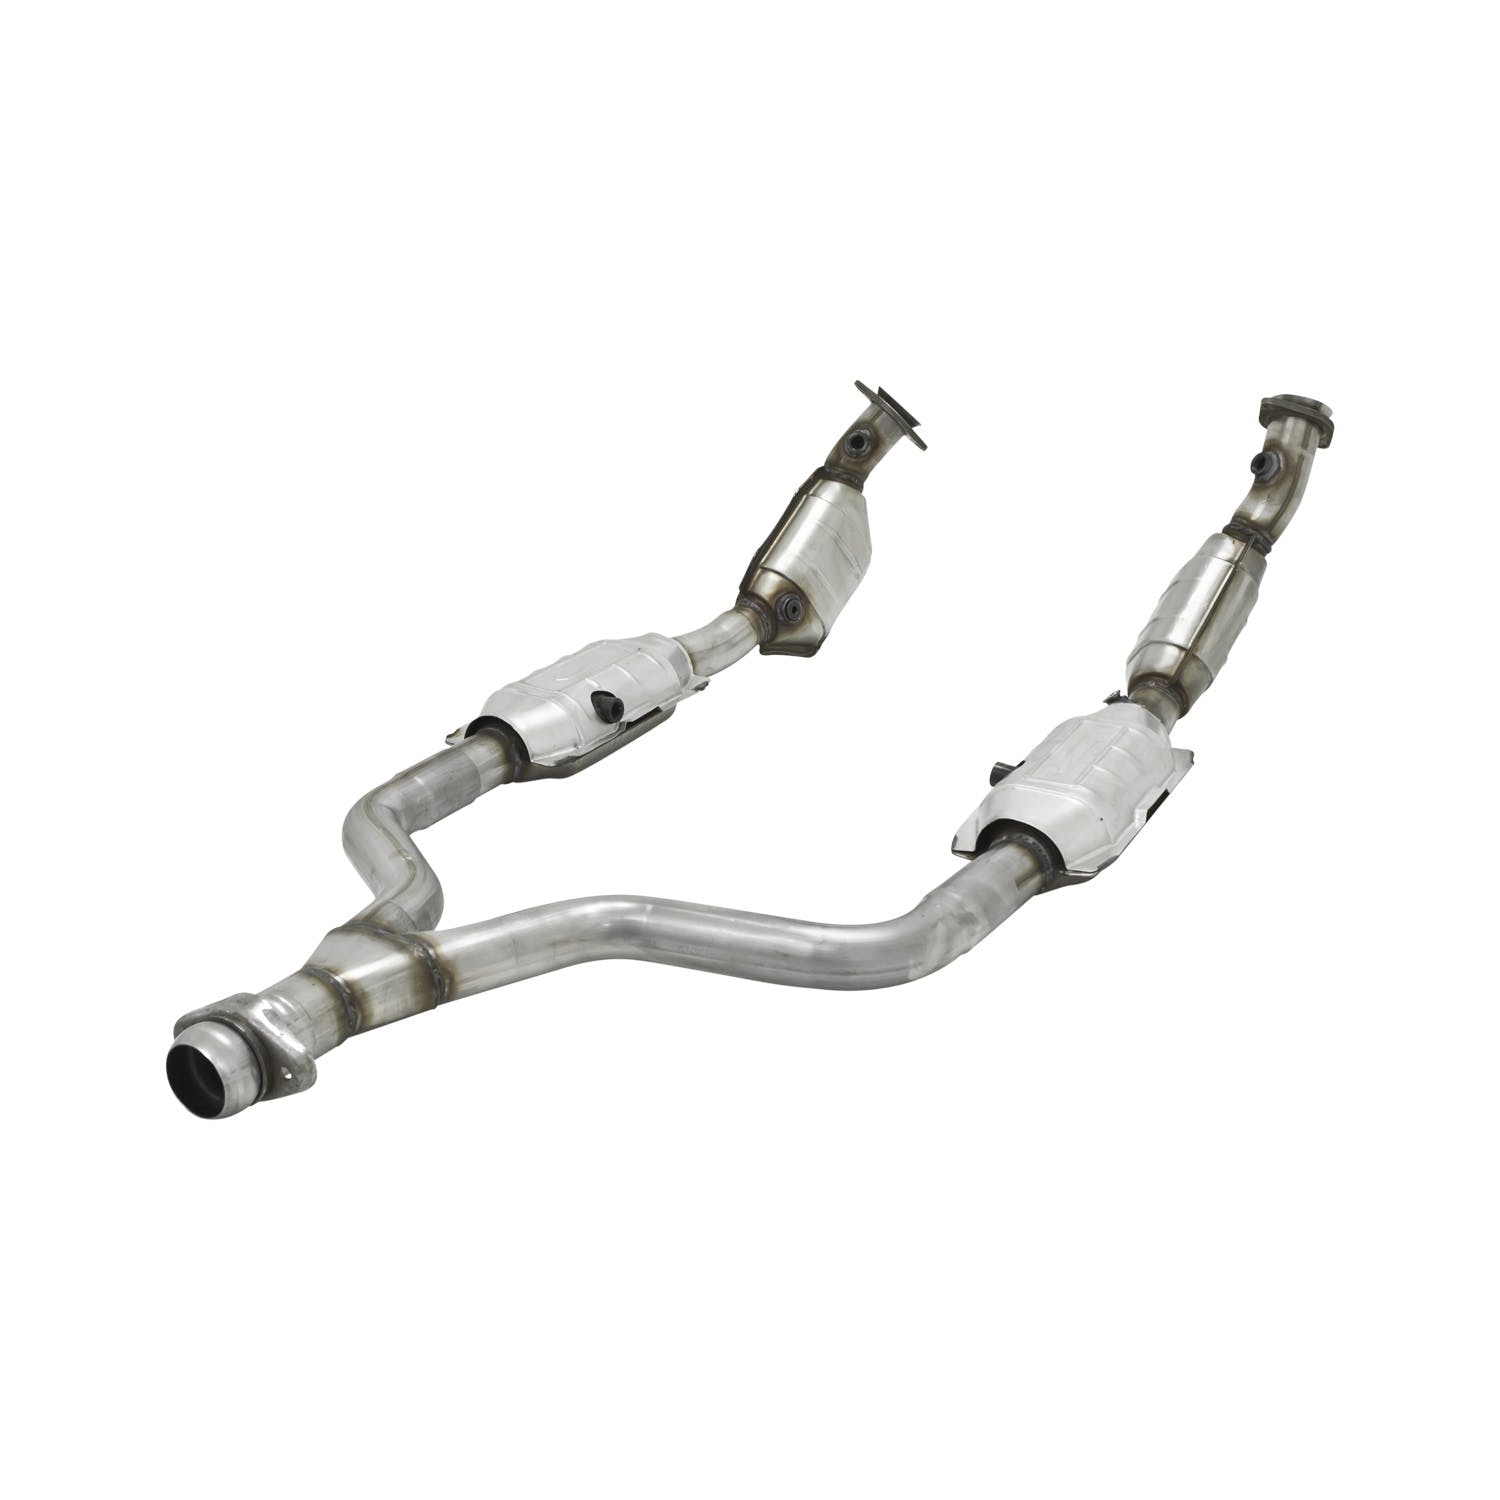 Flowmaster Catalytic Converters 2020023 Catalytic Converter-Direct Fit-2.25 in. Inlet/Outlet-49 State